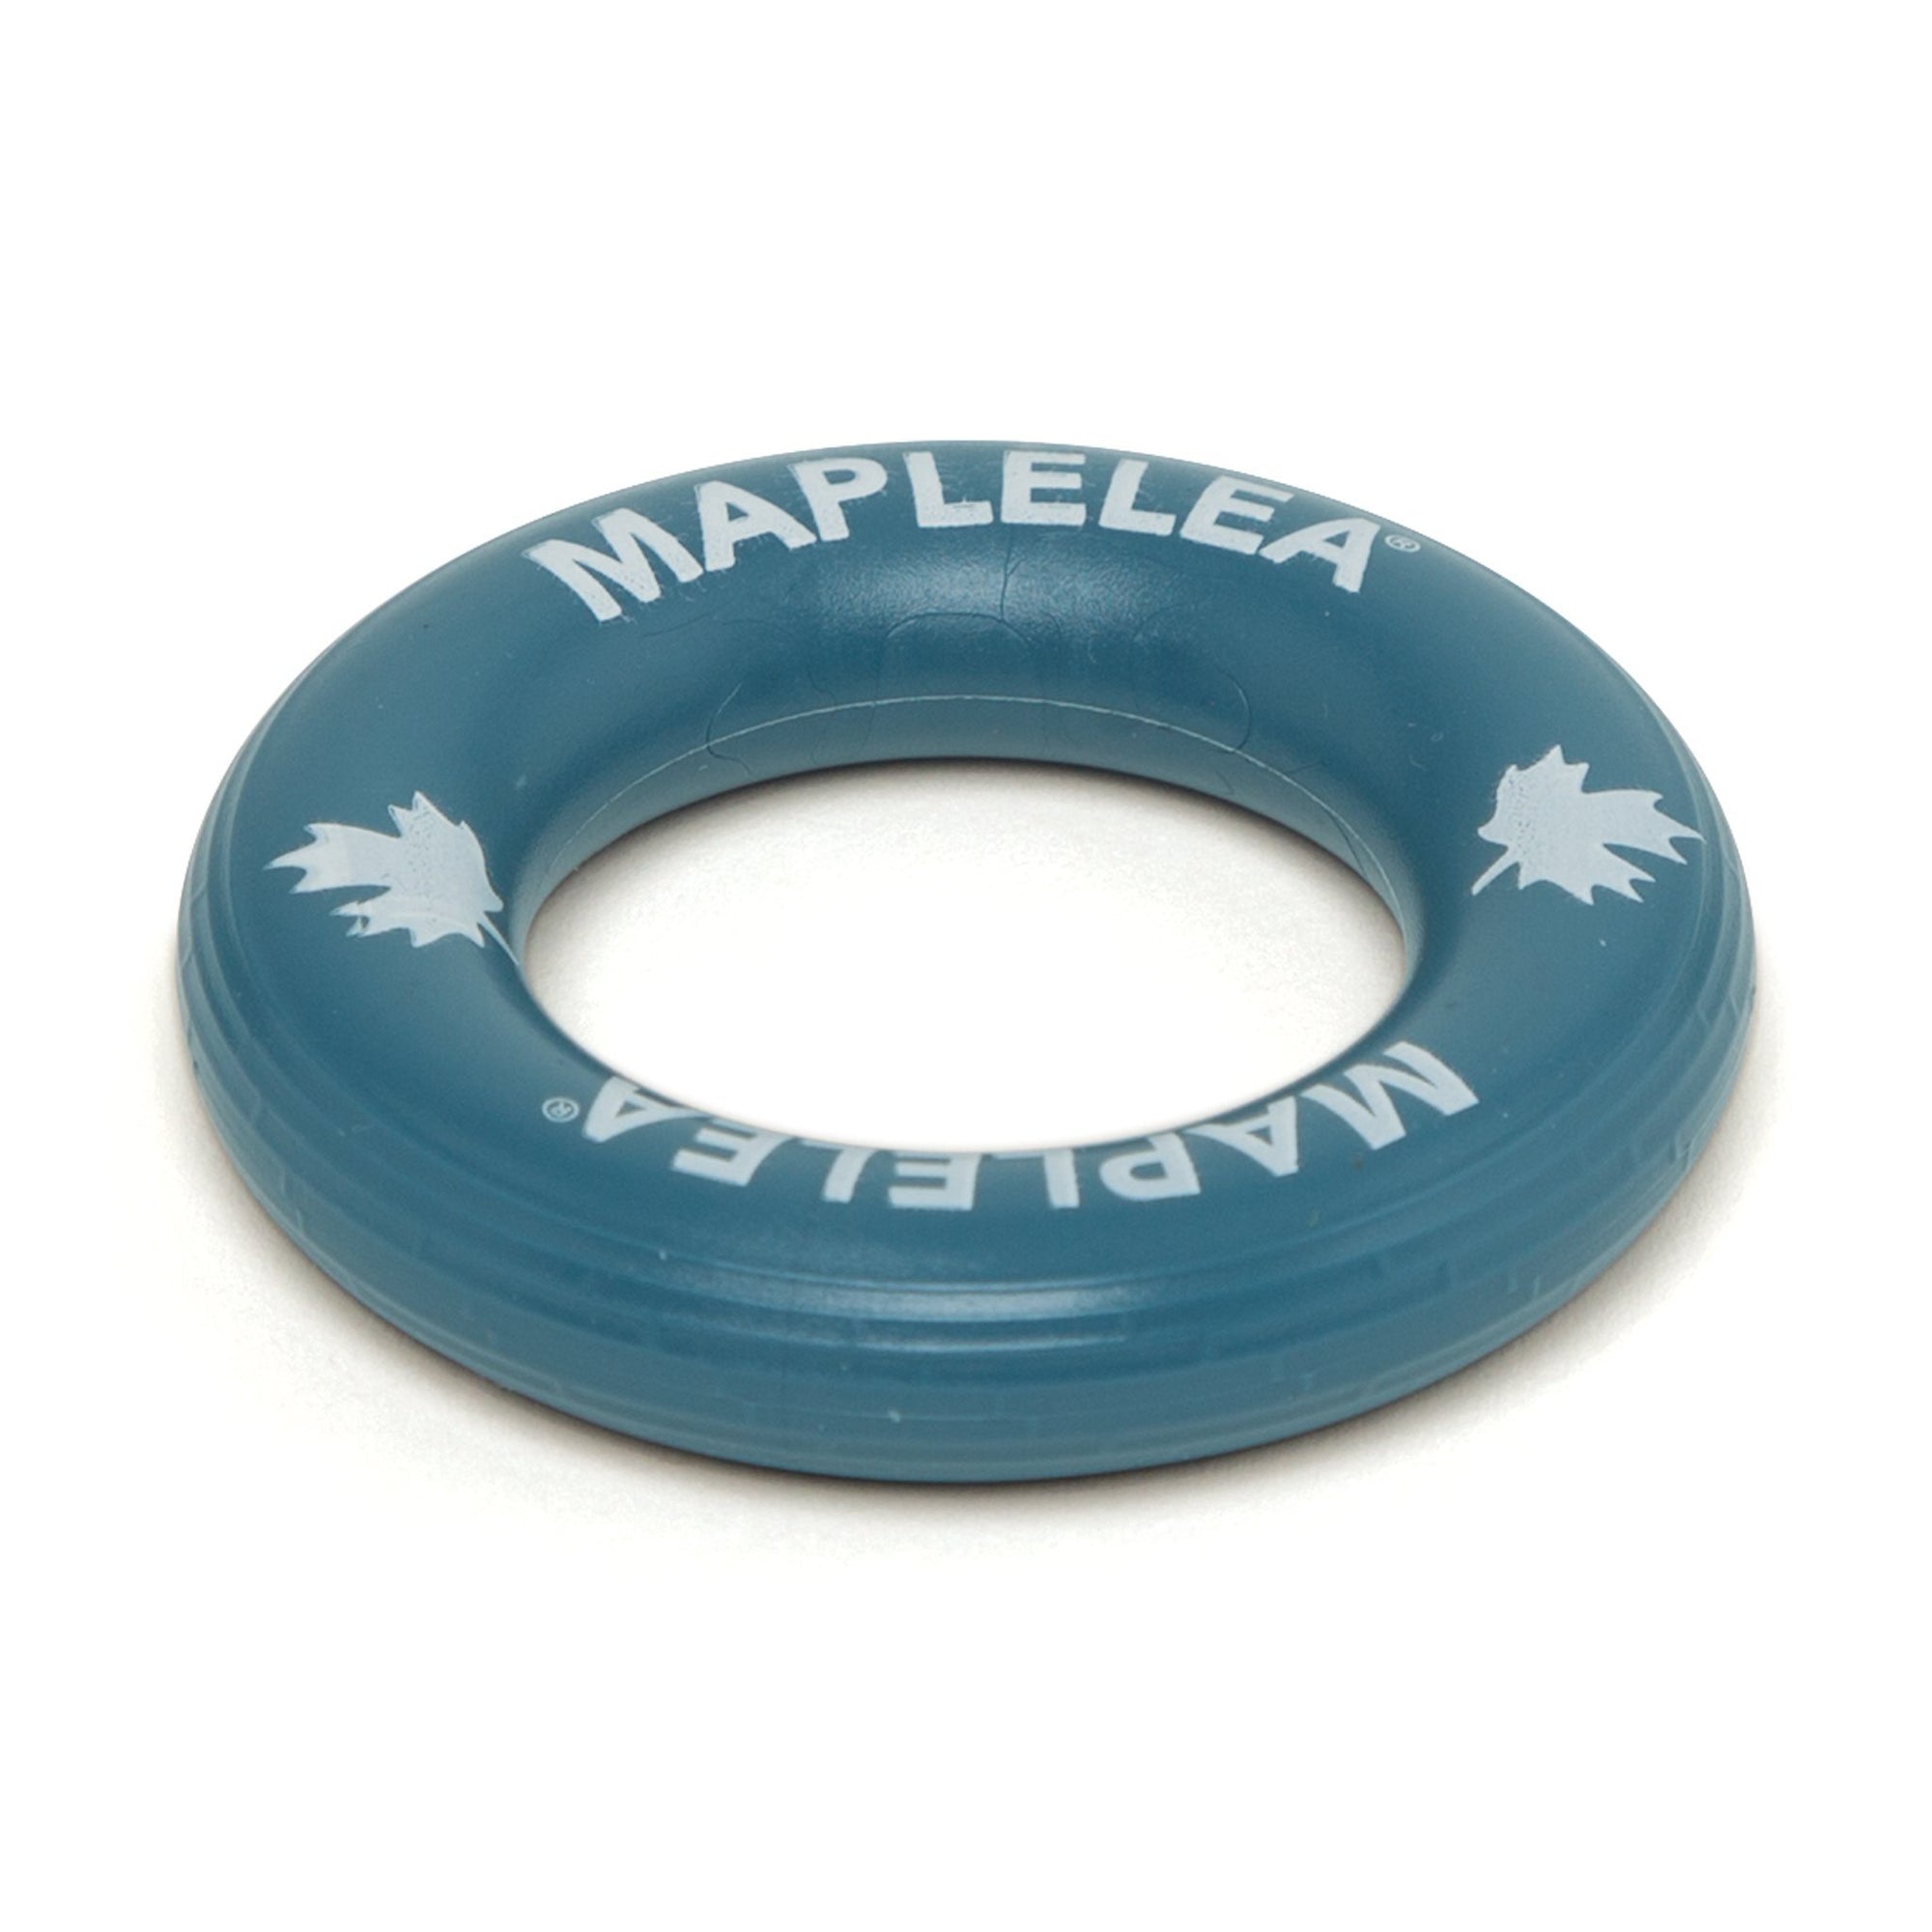 Blue ring used for playing ringette.  Perfect size for 18-inch dolls.